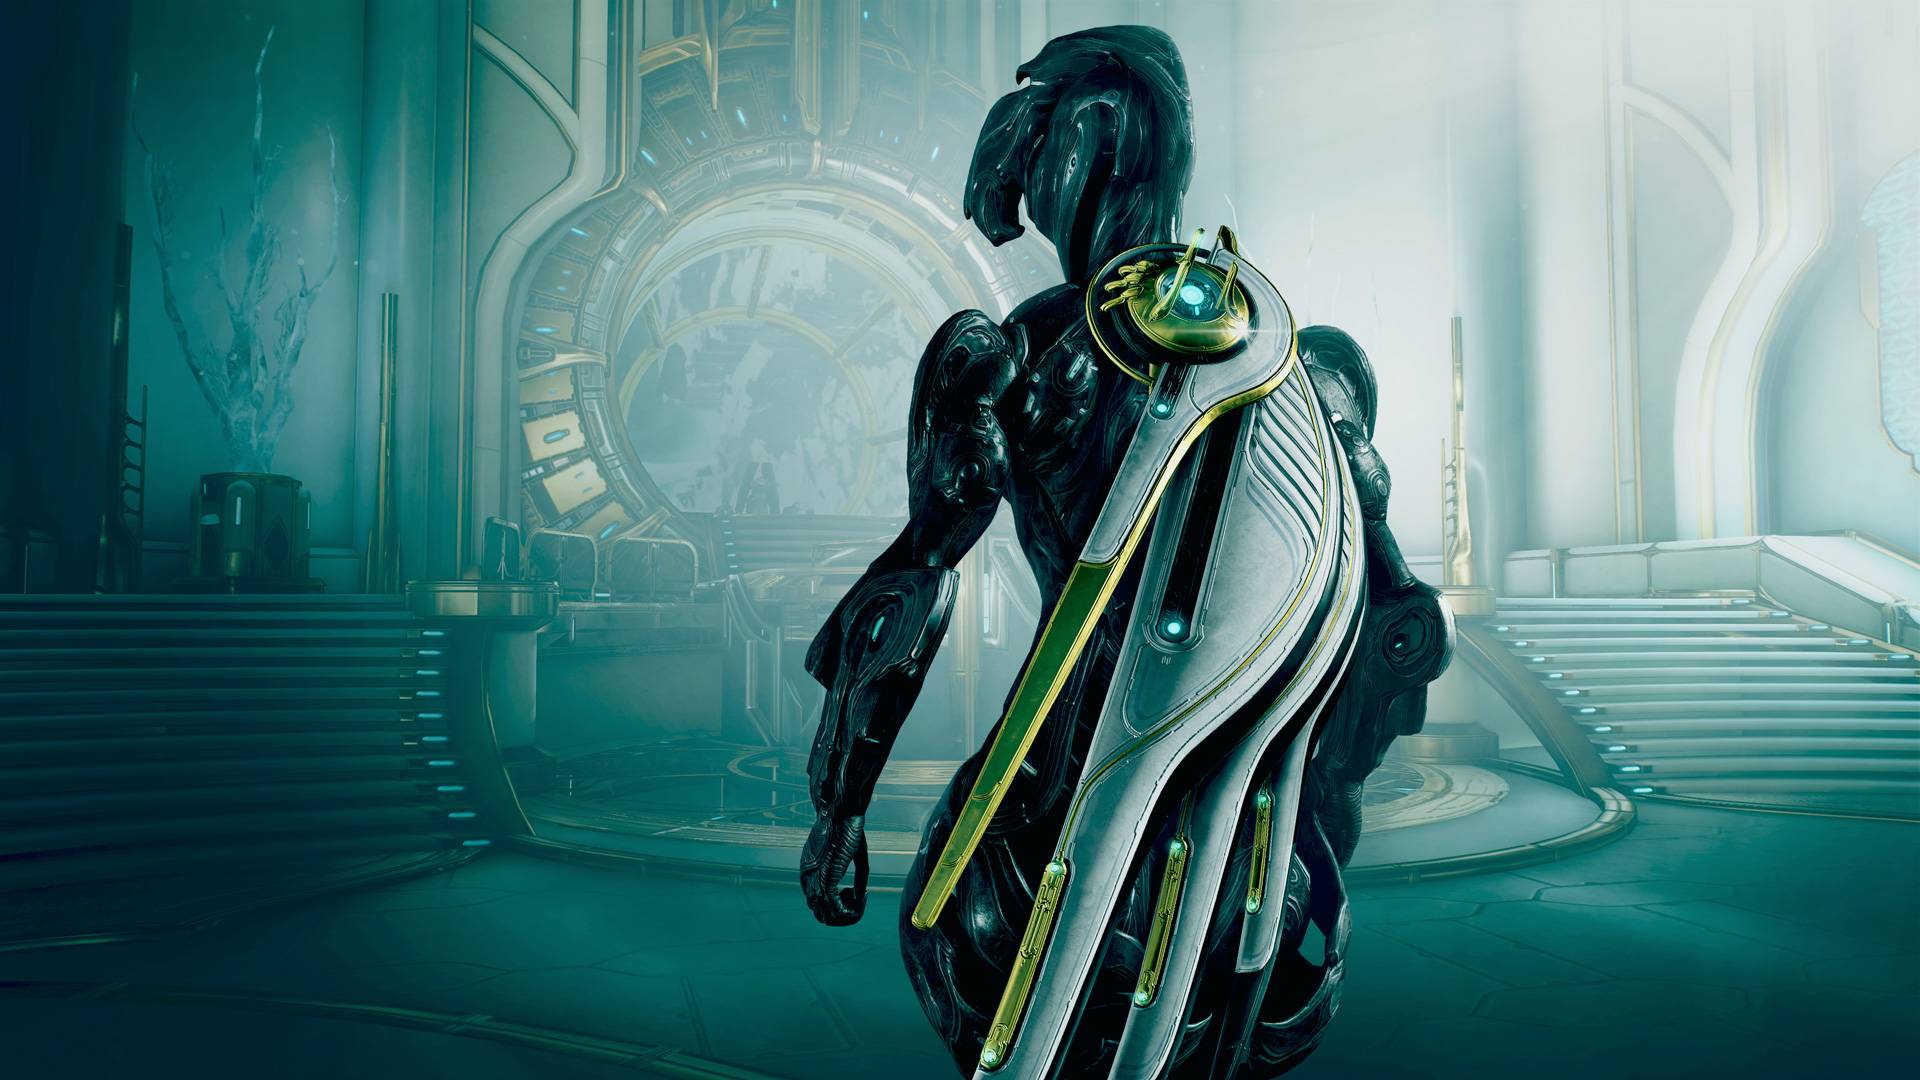 Get a free Syandana from Prime Gaming